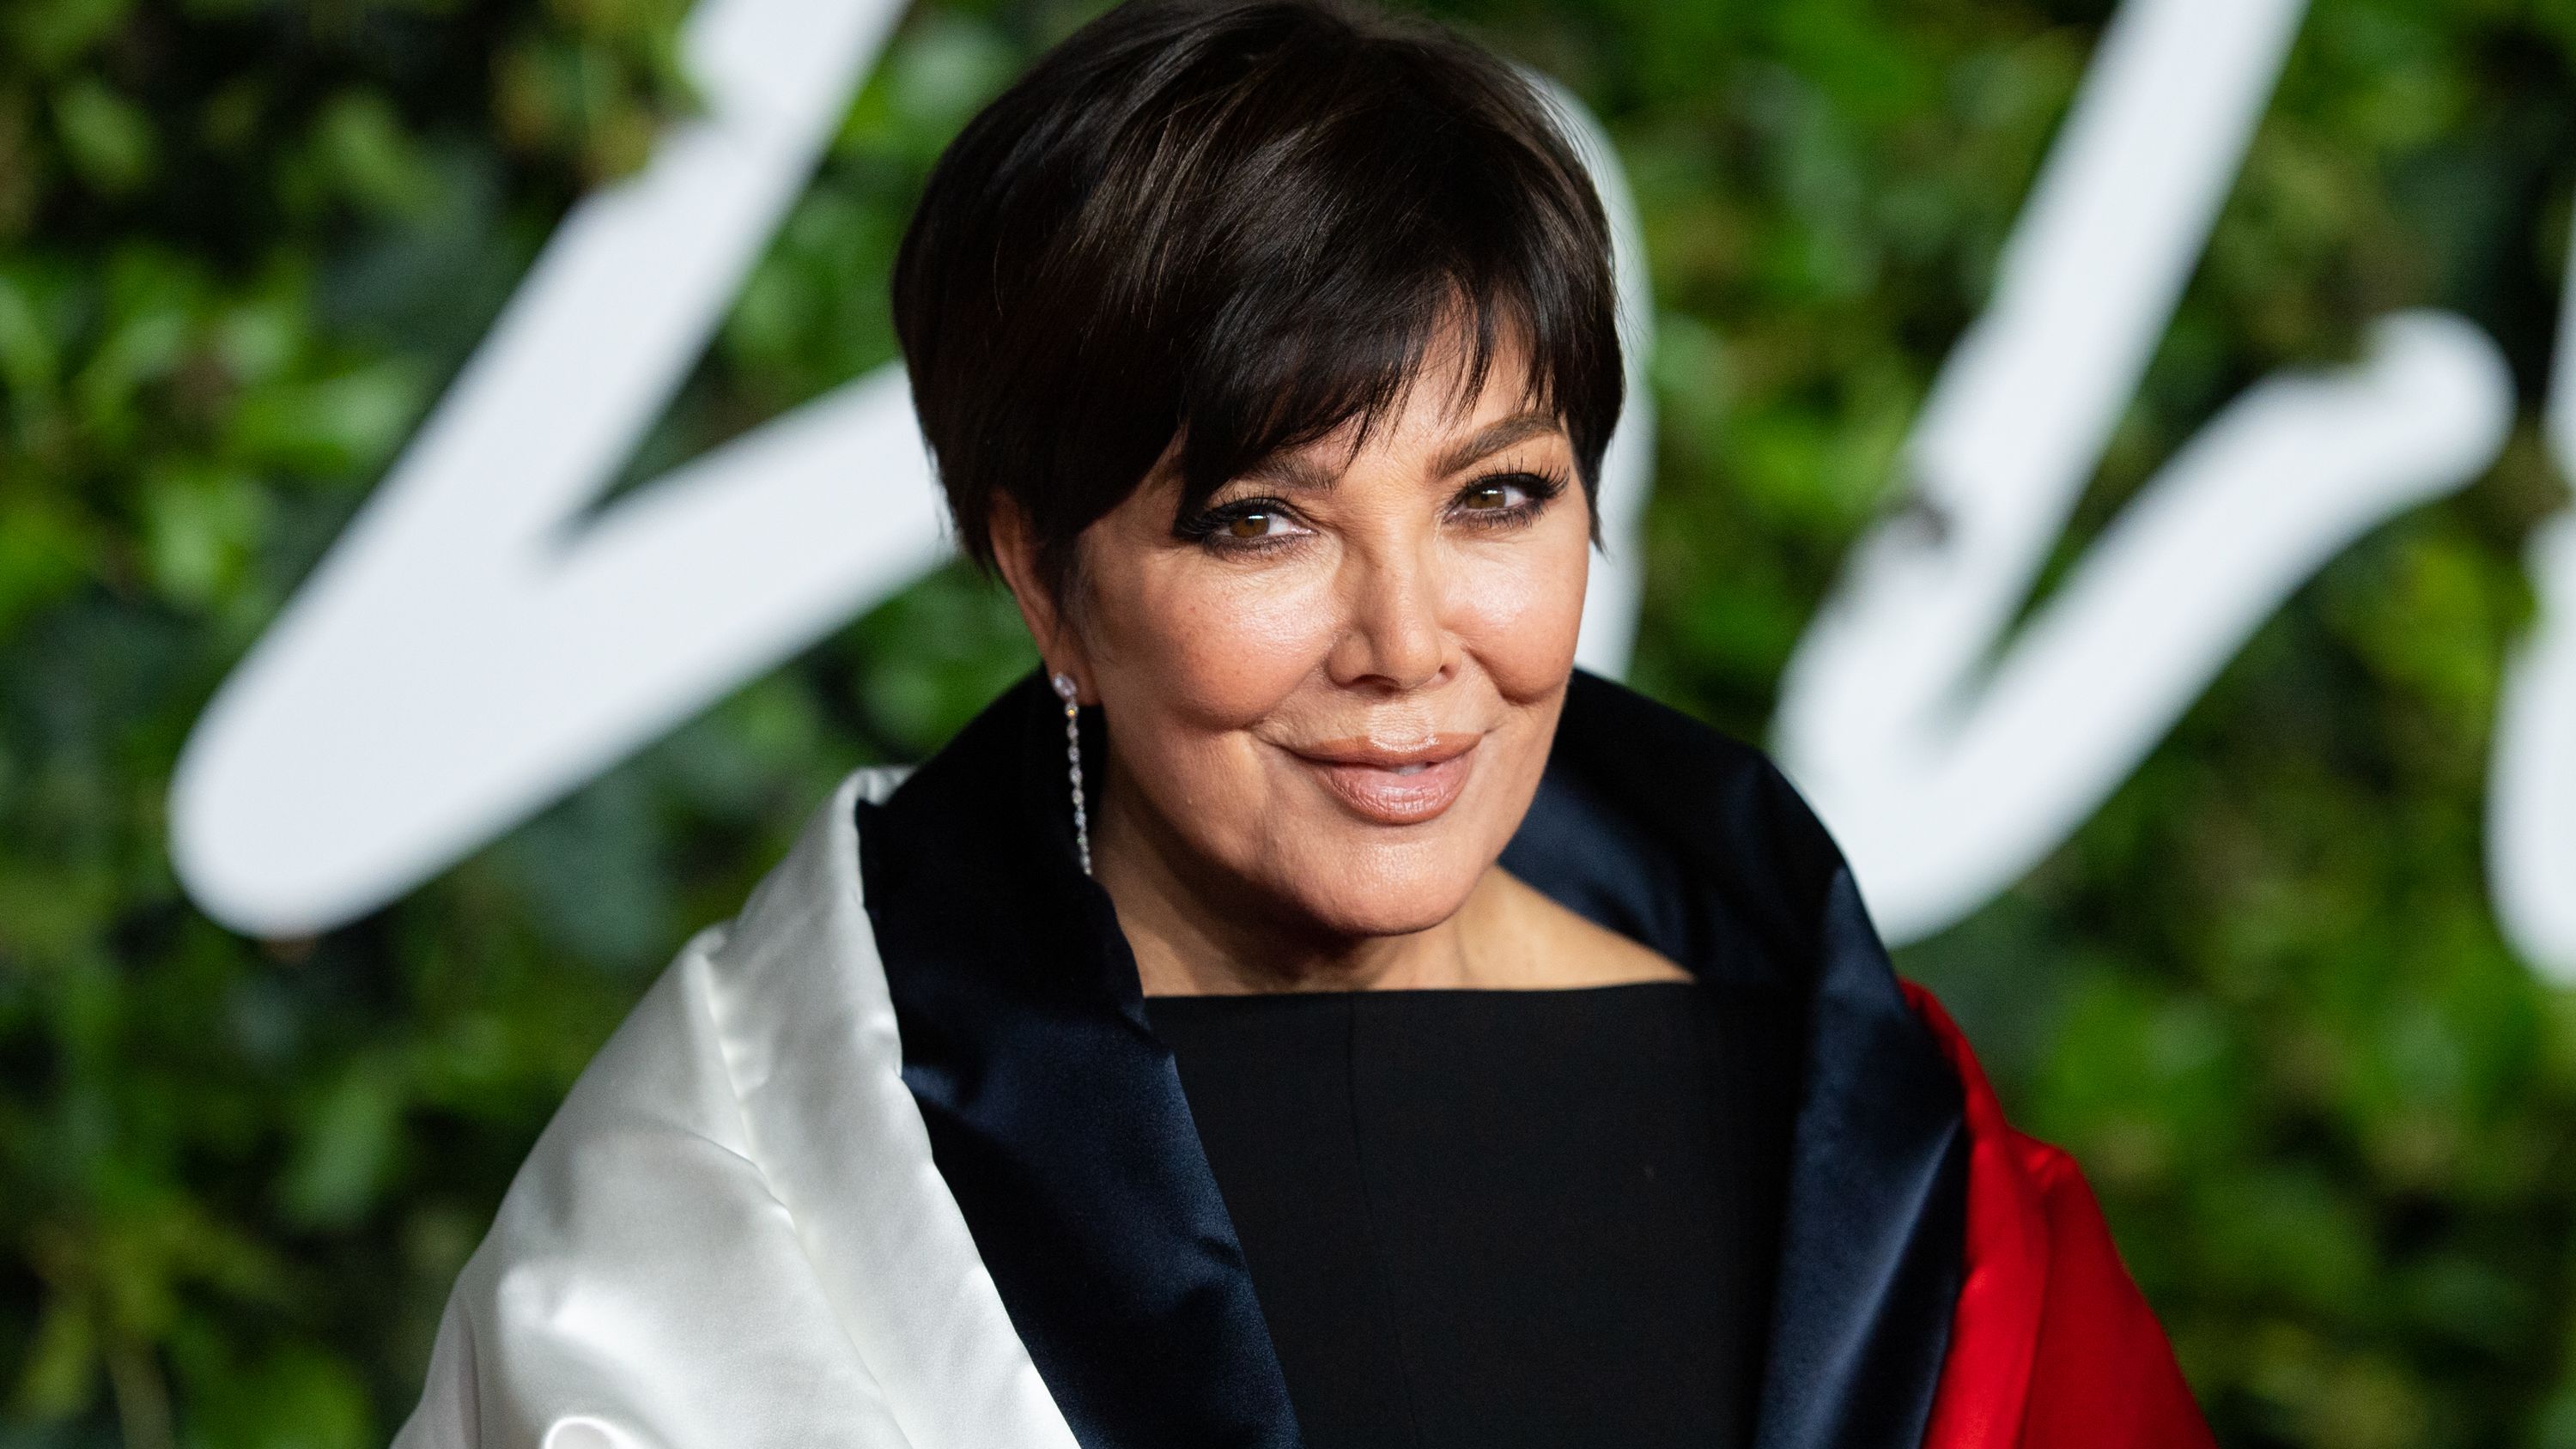 Kris Jenner, seen here attending The Fashion Awards 2021 at the Royal Albert Hall on November 29, 2021 in London, England, is a master at juggling it all. 